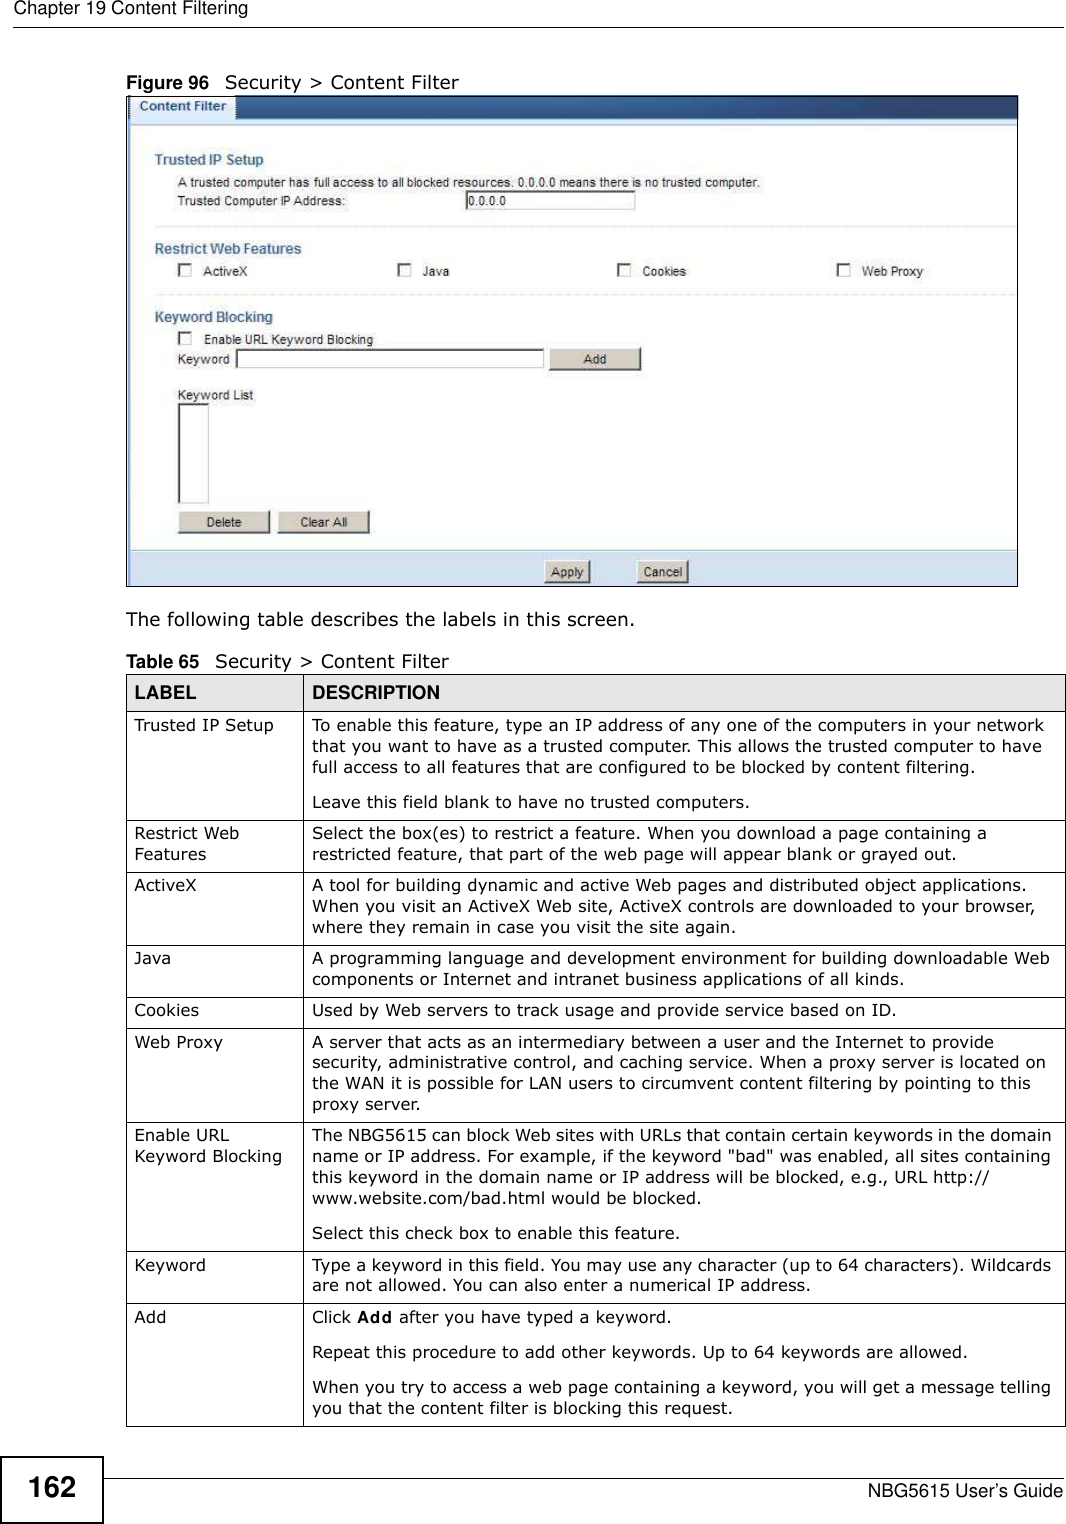 Chapter 19 Content FilteringNBG5615 User’s Guide162Figure 96   Security &gt; Content Filter The following table describes the labels in this screen.Table 65   Security &gt; Content Filter LABEL DESCRIPTIONTrusted IP Setup To enable this feature, type an IP address of any one of the computers in your network that you want to have as a trusted computer. This allows the trusted computer to have full access to all features that are configured to be blocked by content filtering.Leave this field blank to have no trusted computers.Restrict Web FeaturesSelect the box(es) to restrict a feature. When you download a page containing a restricted feature, that part of the web page will appear blank or grayed out.ActiveX  A tool for building dynamic and active Web pages and distributed object applications. When you visit an ActiveX Web site, ActiveX controls are downloaded to your browser, where they remain in case you visit the site again. Java A programming language and development environment for building downloadable Web components or Internet and intranet business applications of all kinds.Cookies Used by Web servers to track usage and provide service based on ID. Web Proxy A server that acts as an intermediary between a user and the Internet to provide security, administrative control, and caching service. When a proxy server is located on the WAN it is possible for LAN users to circumvent content filtering by pointing to this proxy server. Enable URL Keyword BlockingThe NBG5615 can block Web sites with URLs that contain certain keywords in the domain name or IP address. For example, if the keyword &quot;bad&quot; was enabled, all sites containing this keyword in the domain name or IP address will be blocked, e.g., URL http://www.website.com/bad.html would be blocked. Select this check box to enable this feature.Keyword Type a keyword in this field. You may use any character (up to 64 characters). Wildcards are not allowed. You can also enter a numerical IP address.Add  Click Add after you have typed a keyword. Repeat this procedure to add other keywords. Up to 64 keywords are allowed.When you try to access a web page containing a keyword, you will get a message telling you that the content filter is blocking this request.